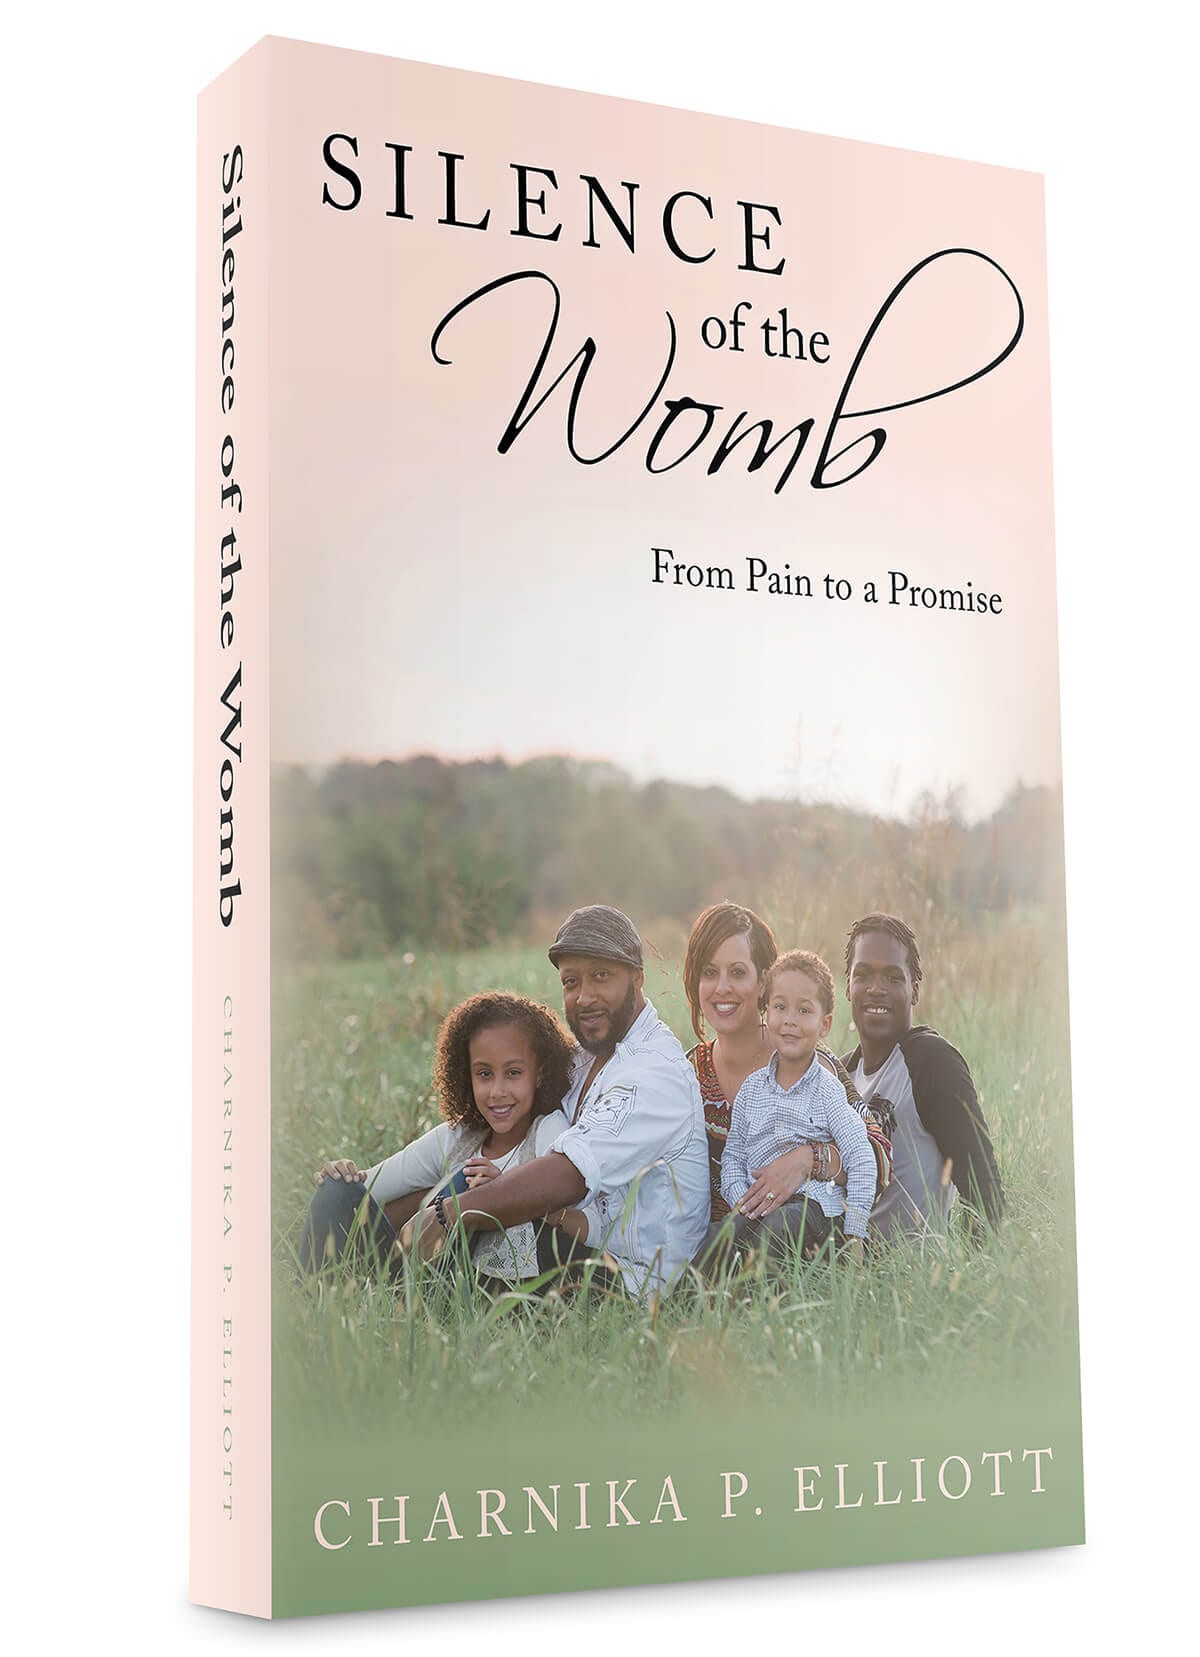 Silence of the Womb book